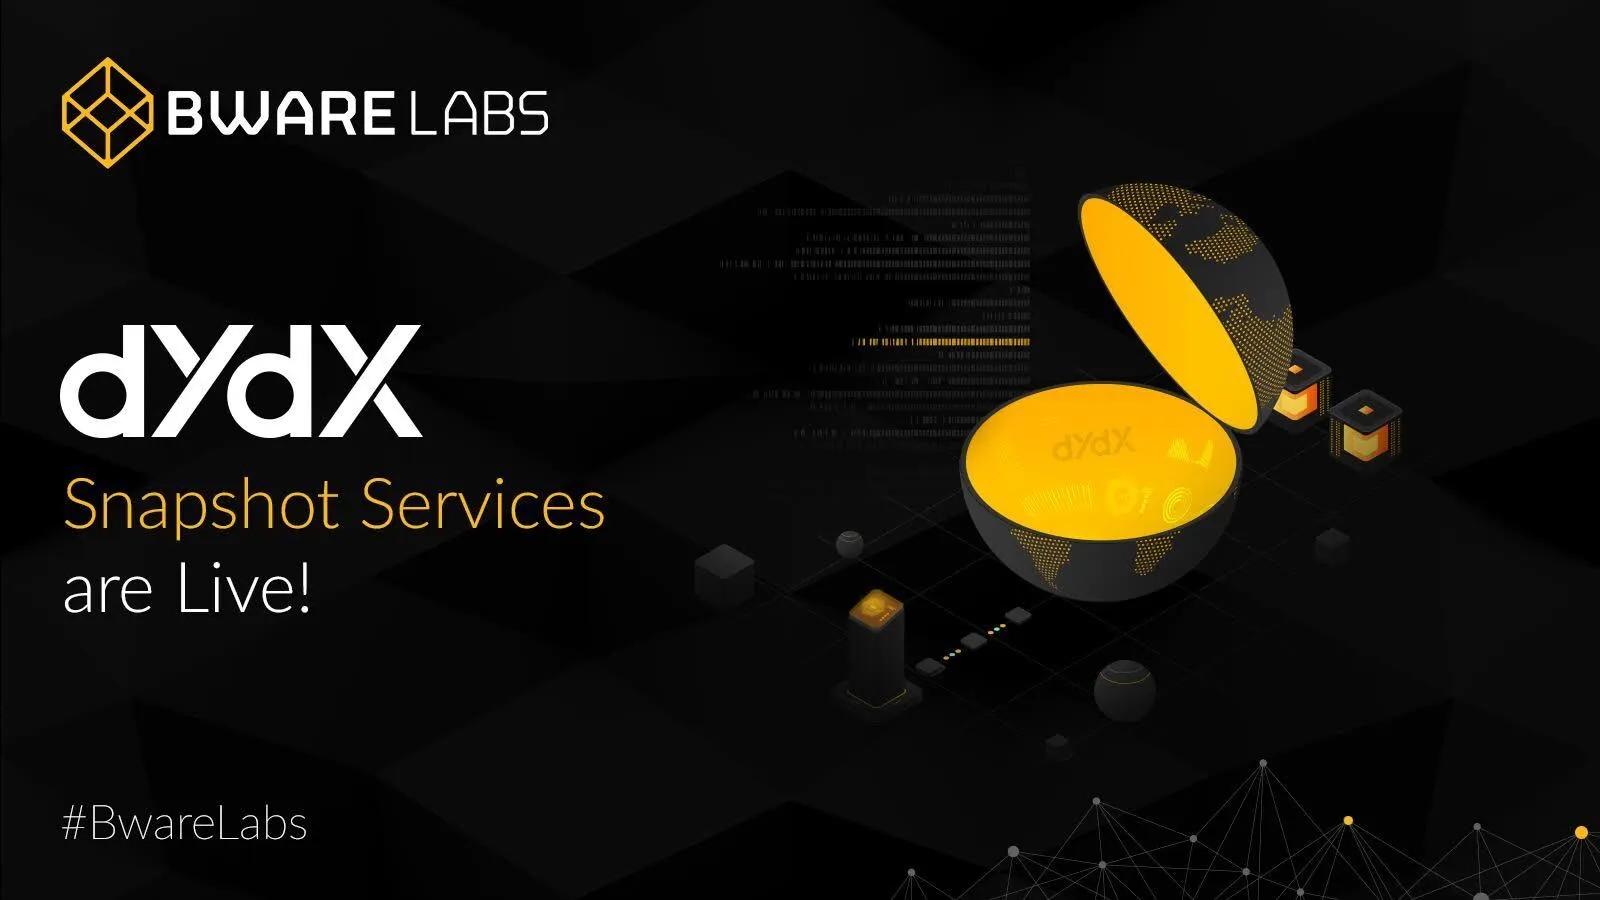 Bware Labs Continues to Support the dYdX Mission with New Releases